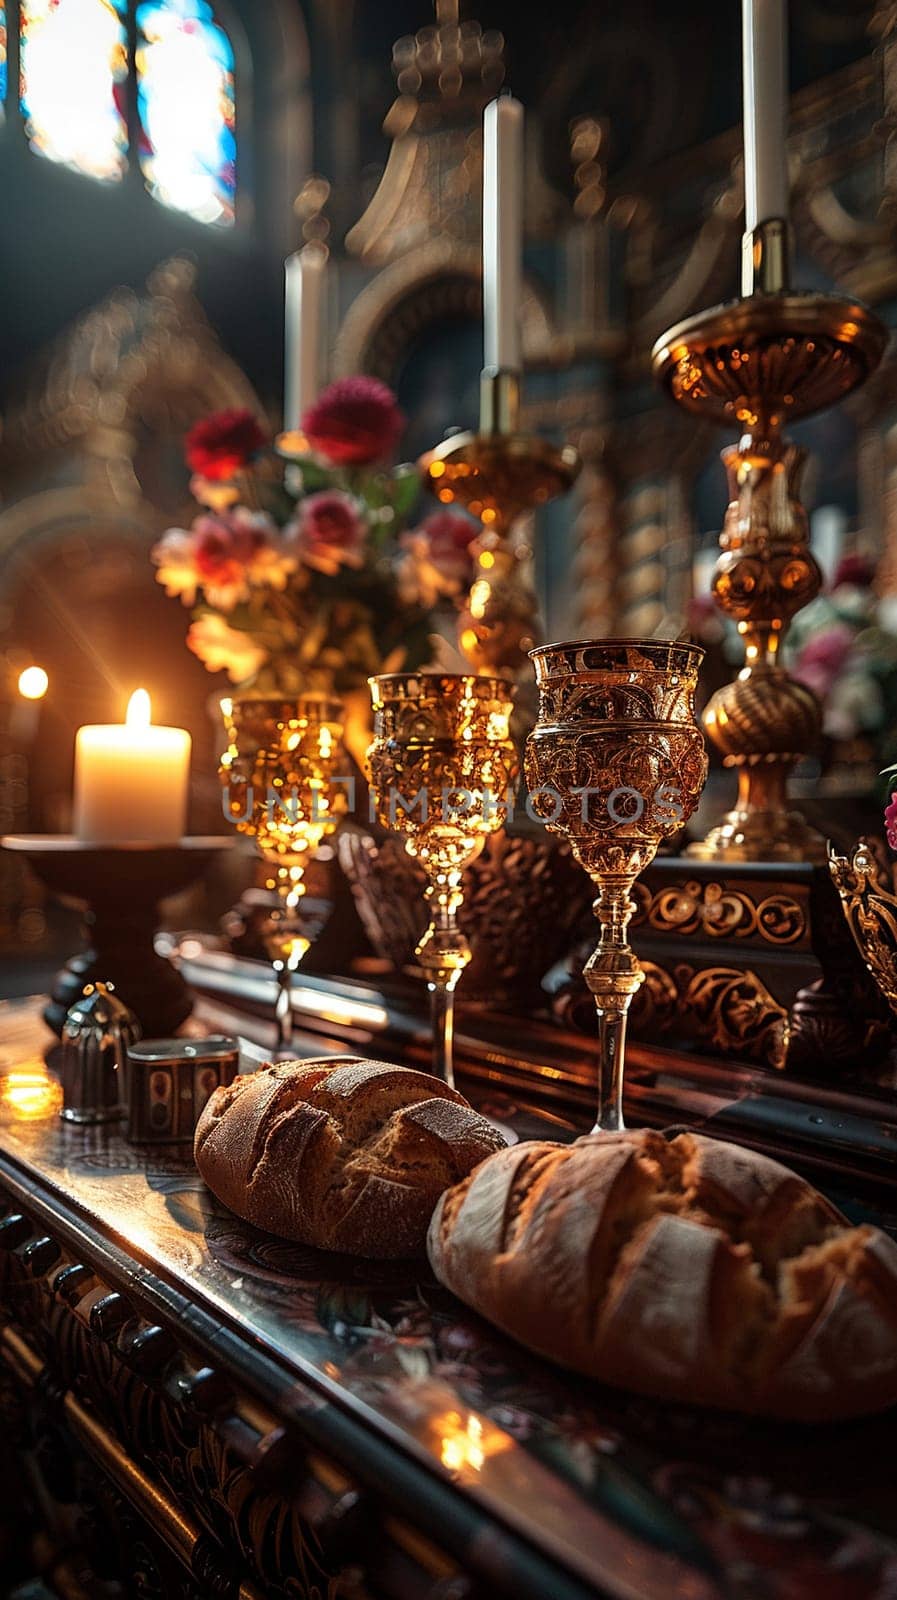 Holy Communion Elements Prepared on an Altar The bread and wine slightly out of focus by Benzoix